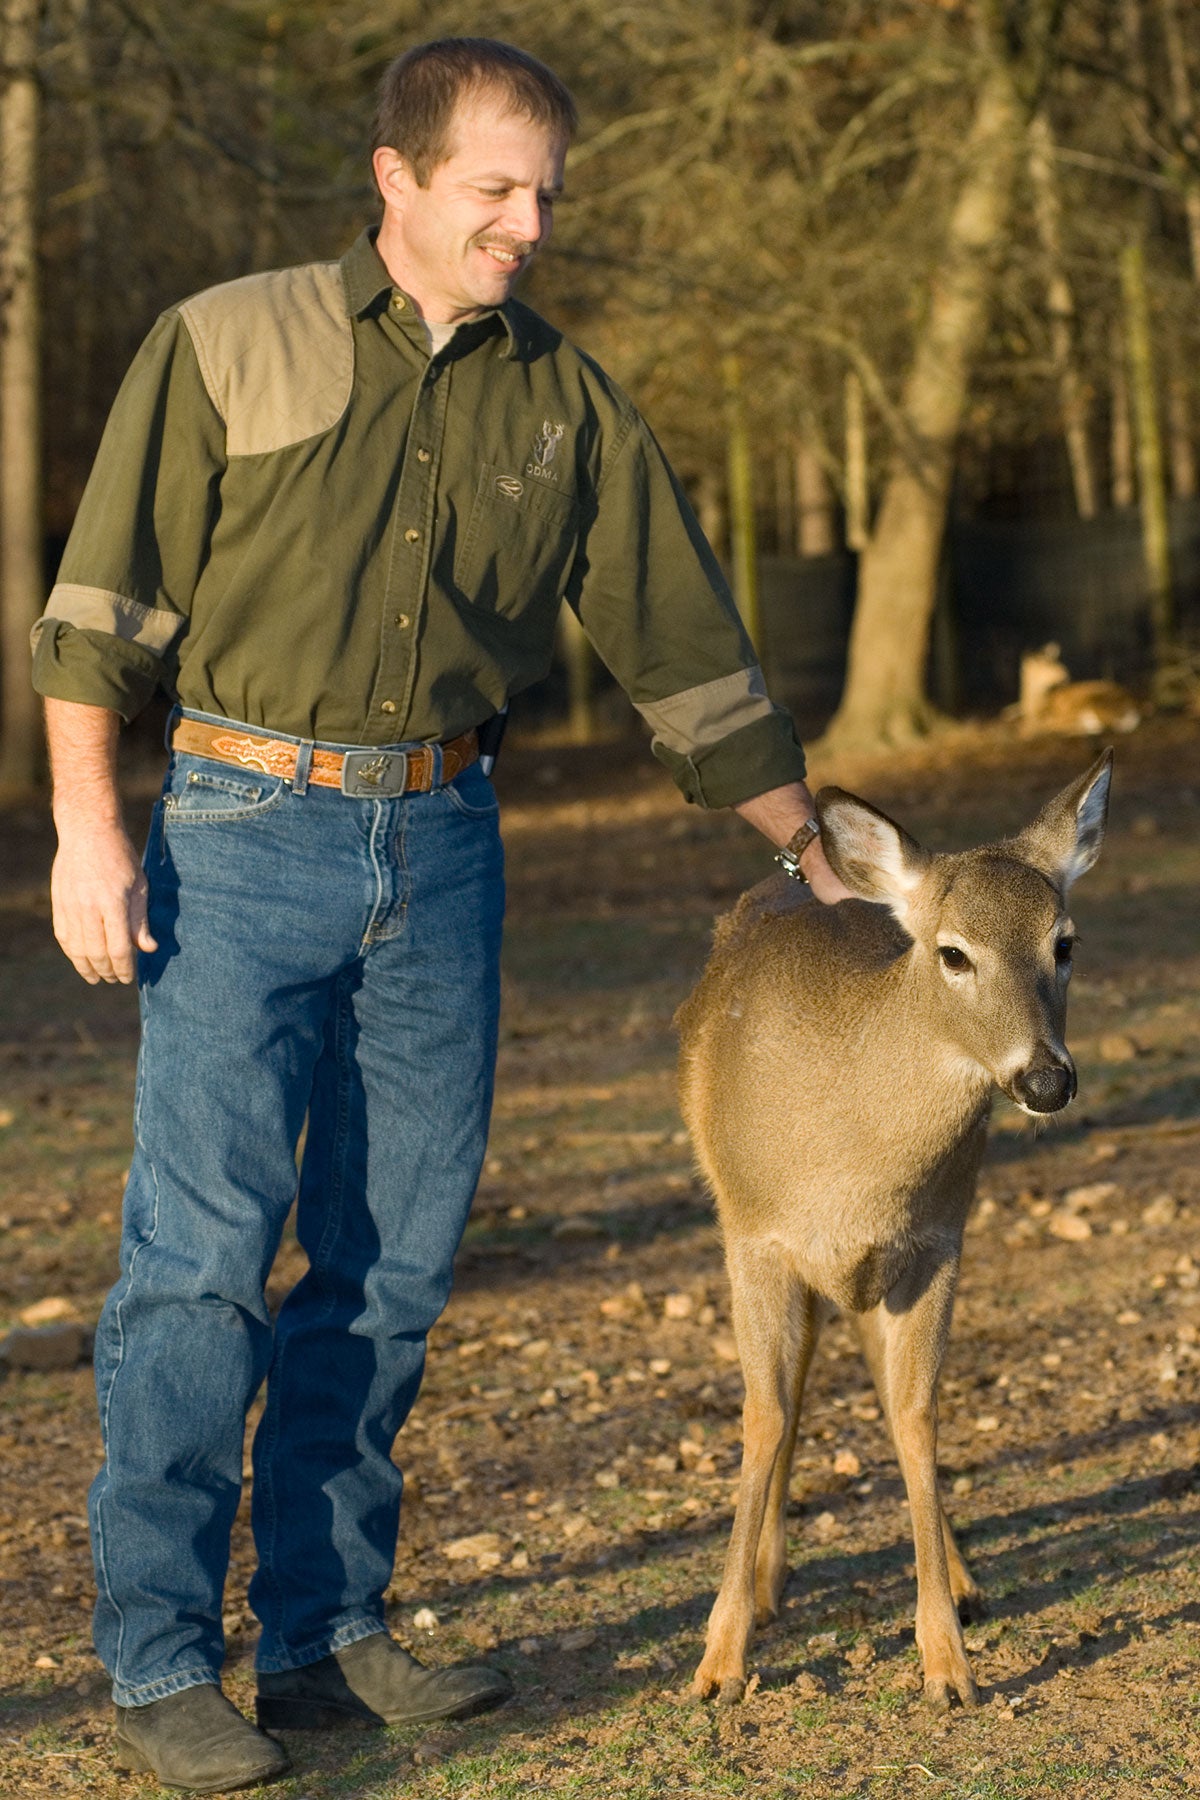 Karl Miller founded the University of Georgia Athens Deer Lab. Now helps Sitka develop high-end hunting apparel with science in mind.